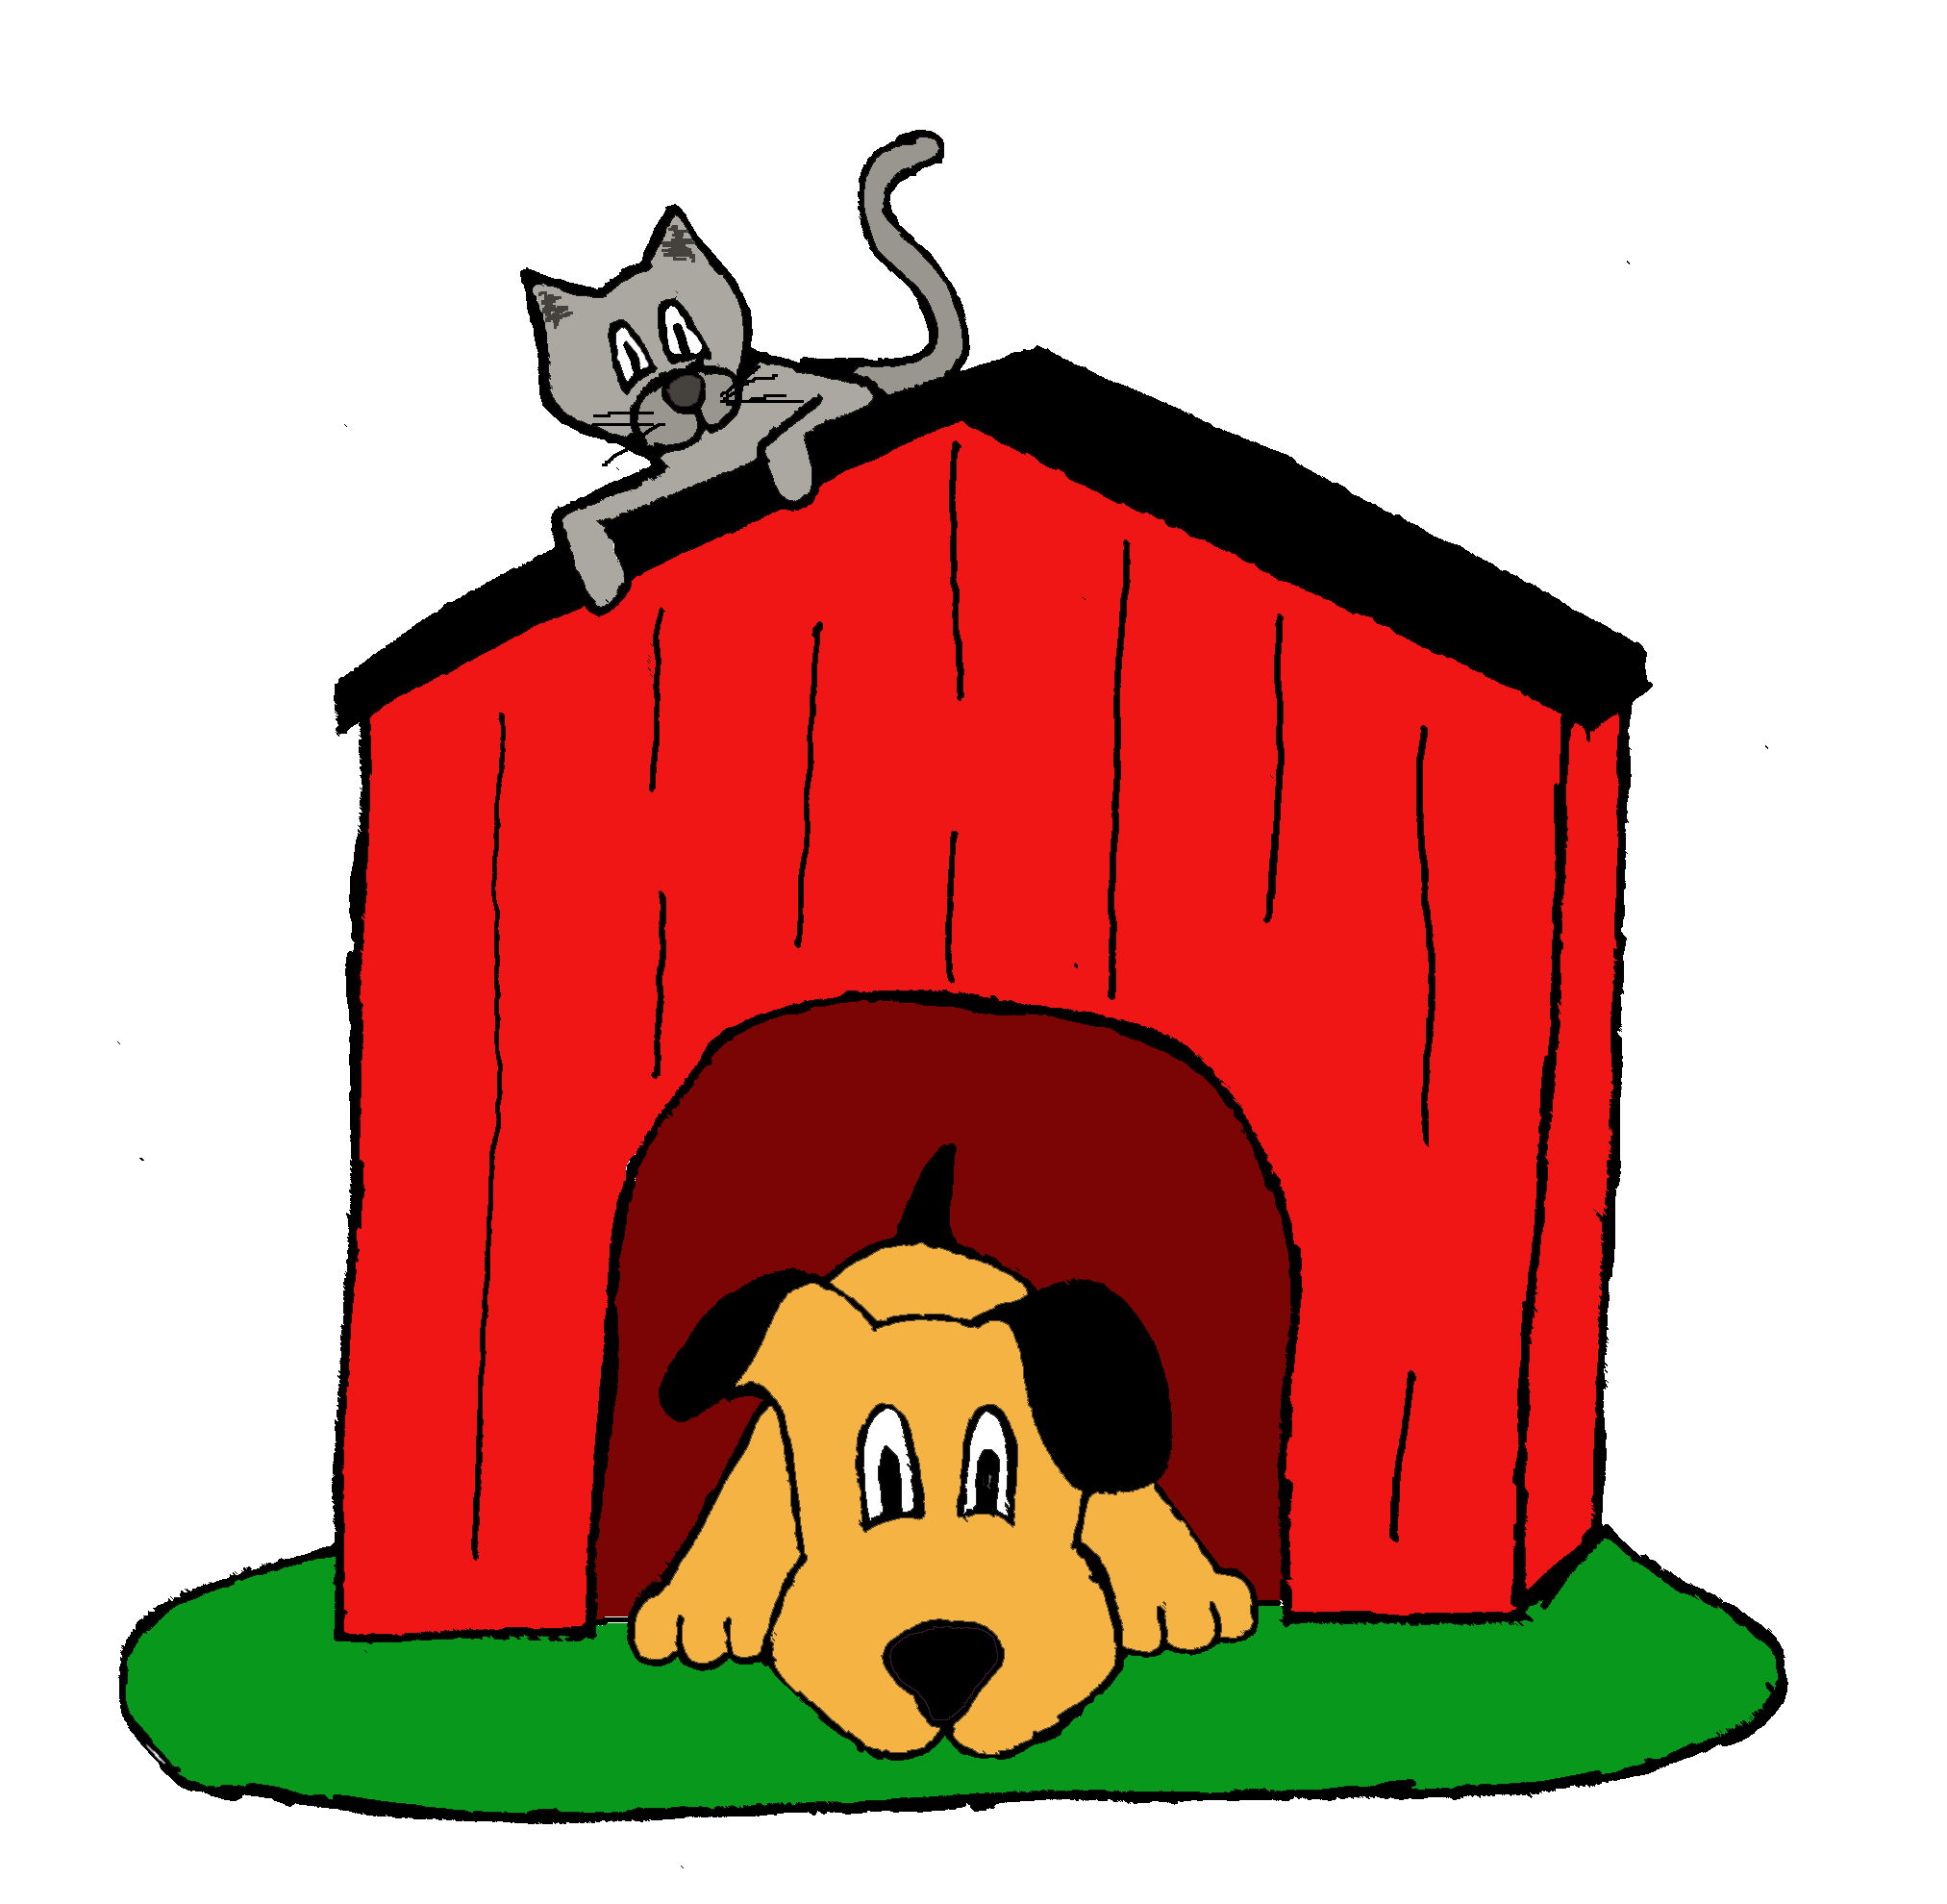 Inside out at getdrawings. Doghouse clipart cat house